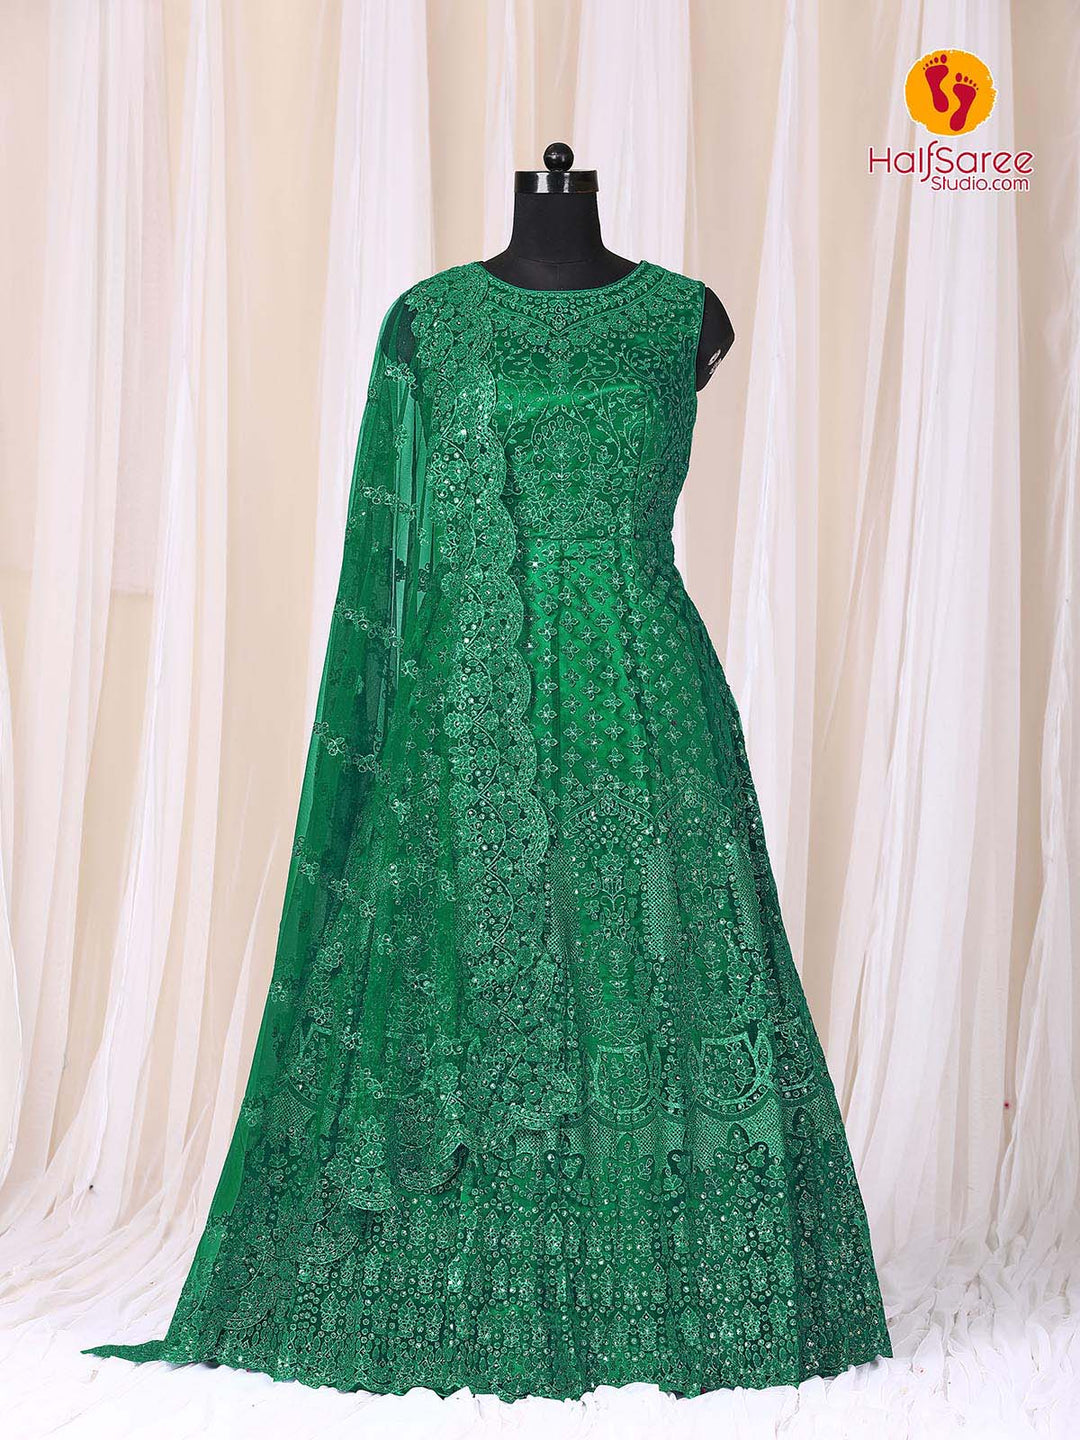 Black dummy has dressed up with Green colour party wera embroidered net gown